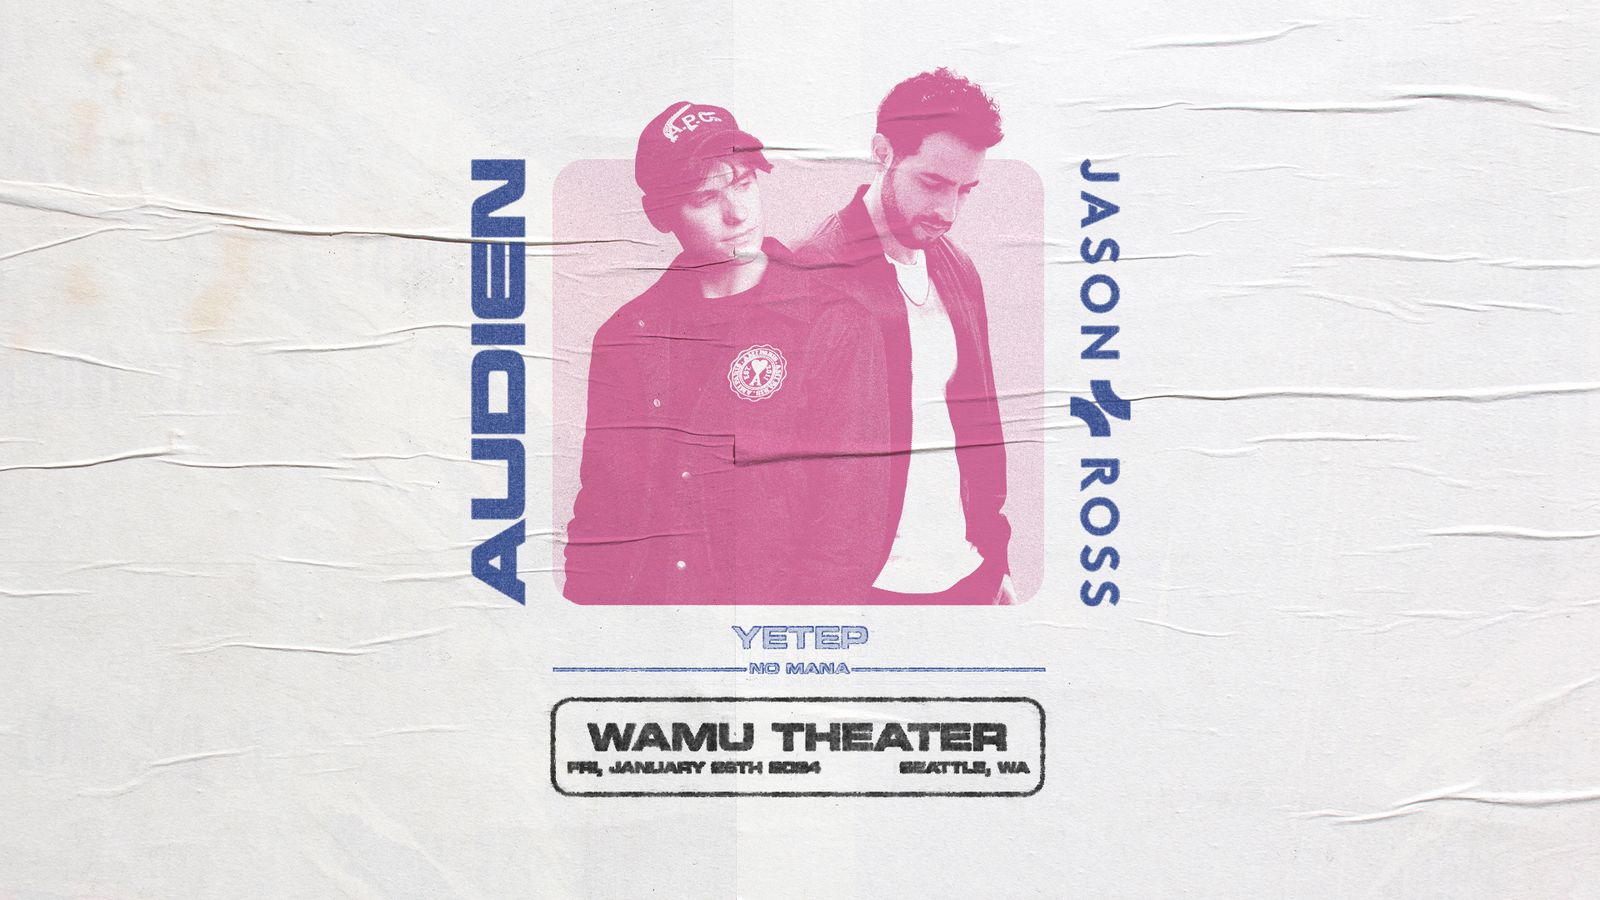 Audien x Jason Ross show flyer for upcoming show at Wamu Theater, pic of both DJs in pink tint